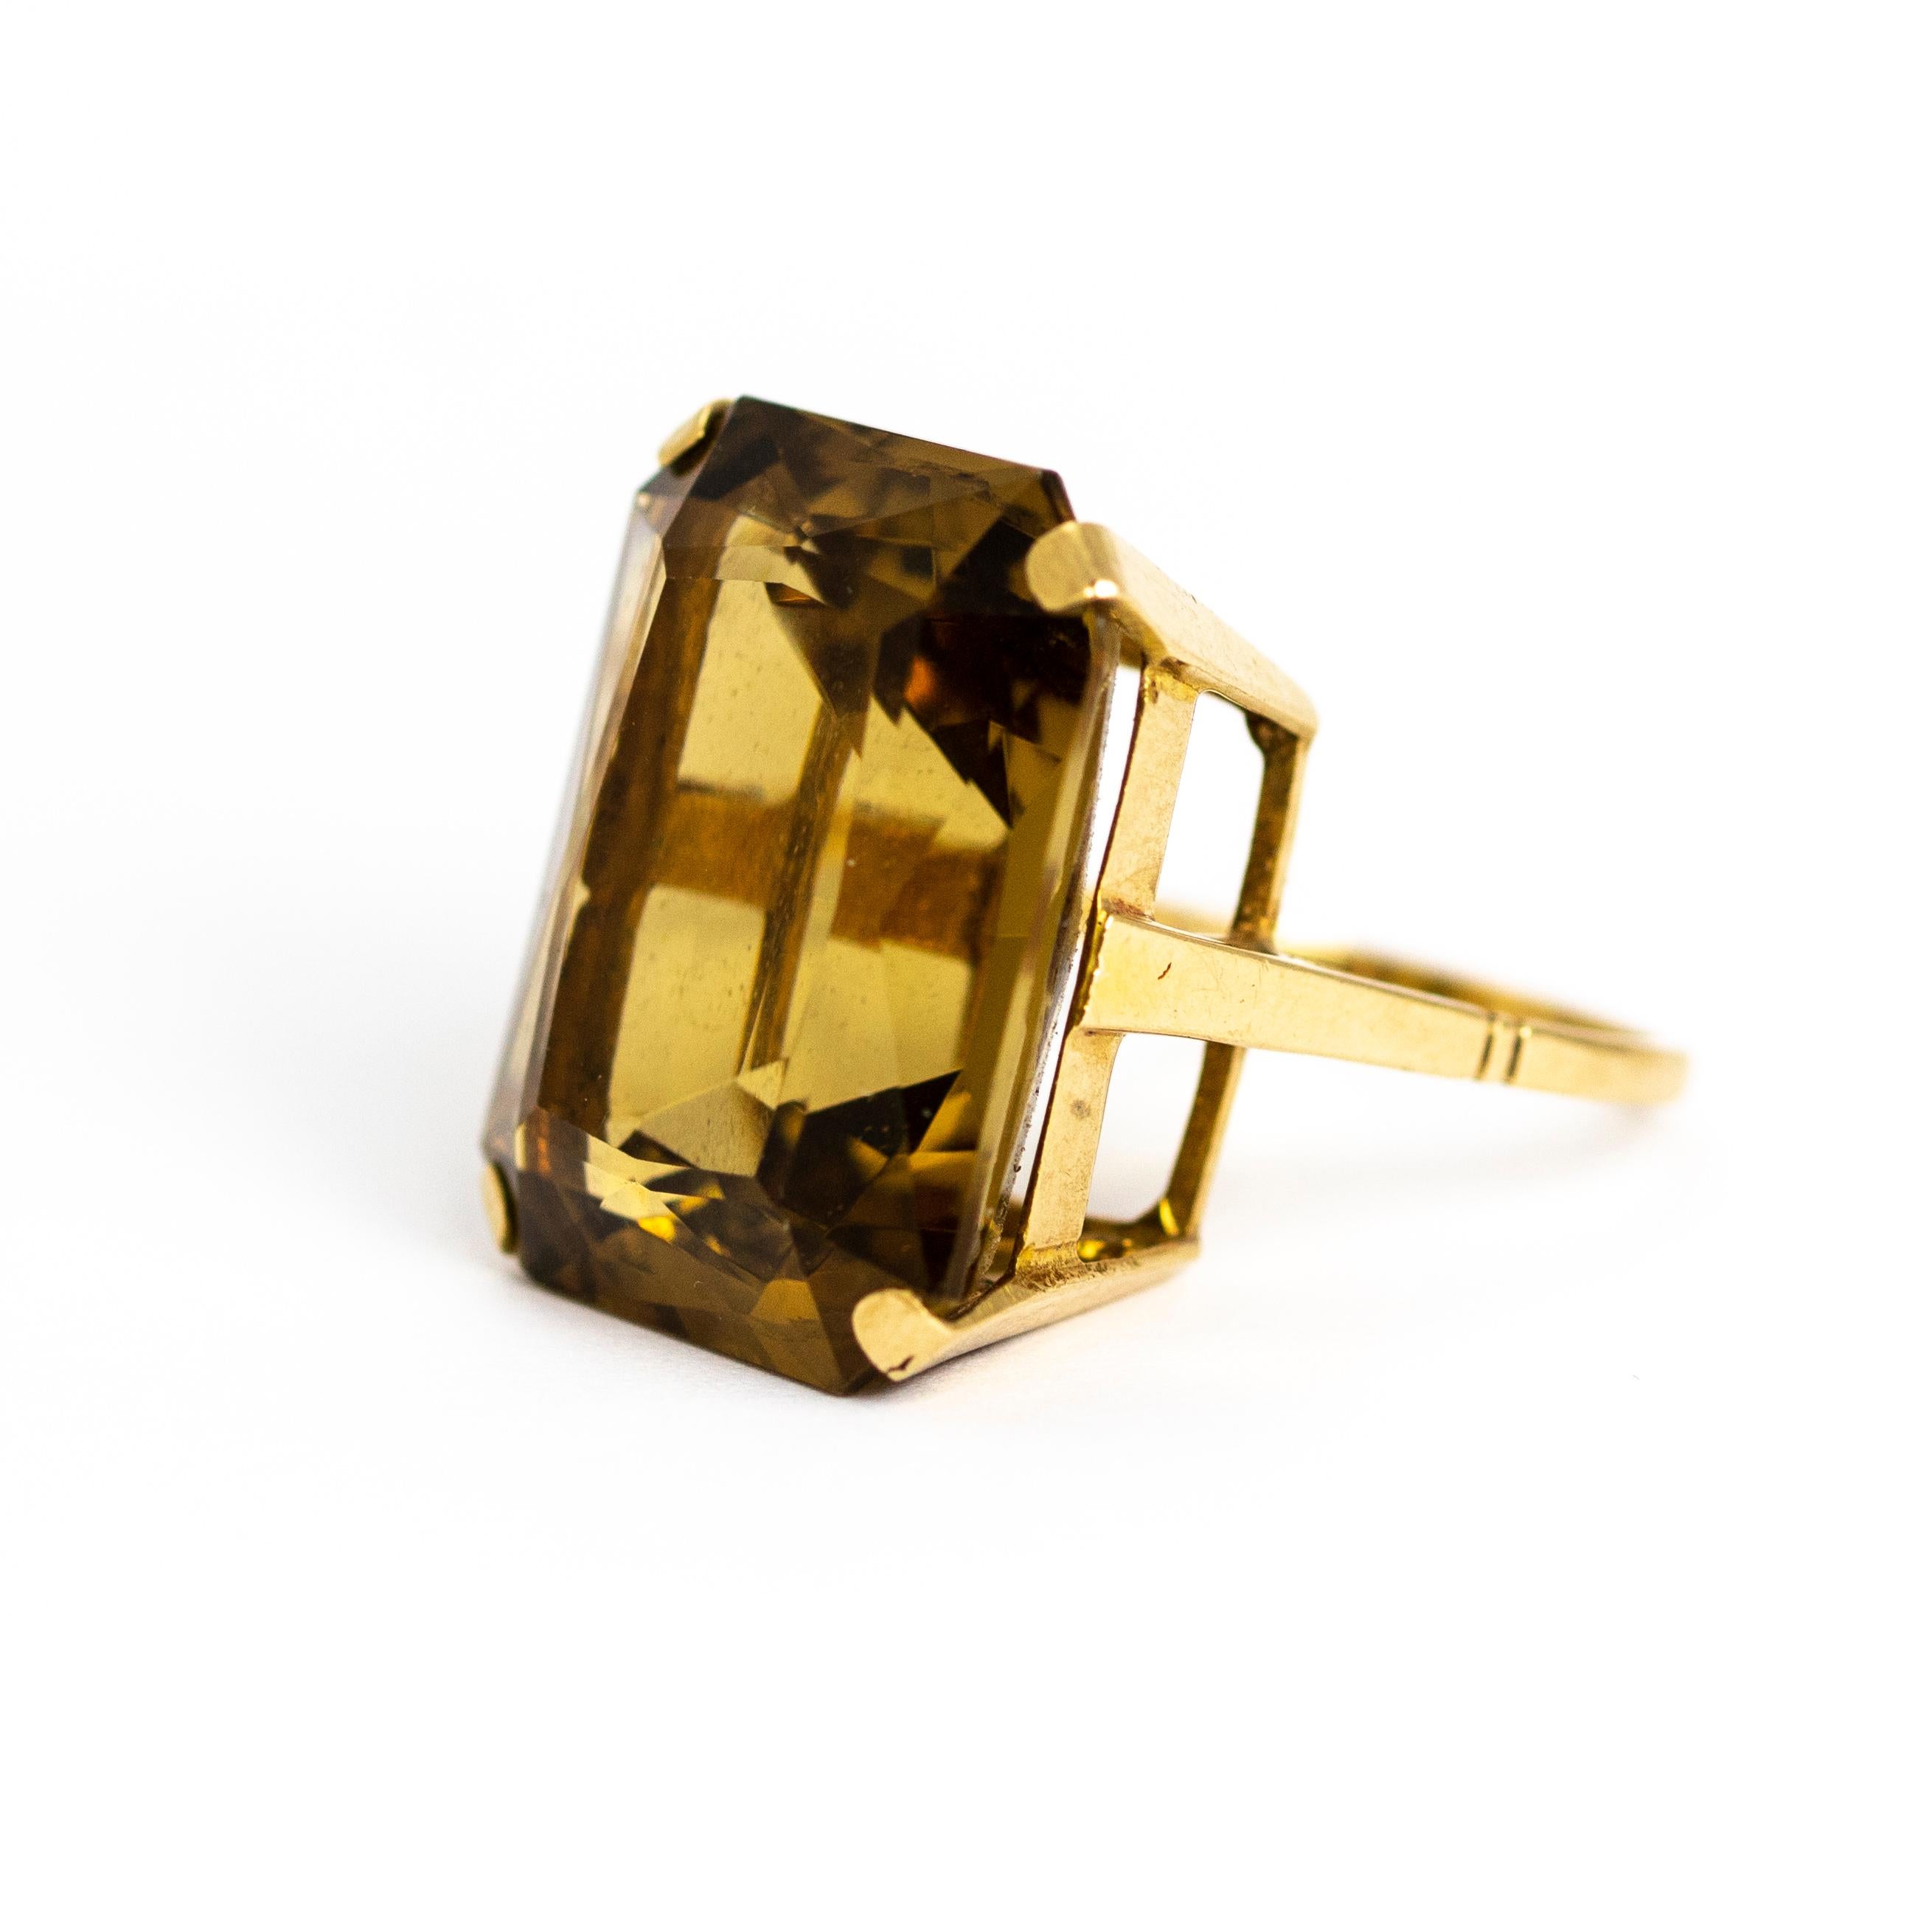 Art Nouveau Late Edwardian Citrine and 9 Carat Gold Cocktail Ring